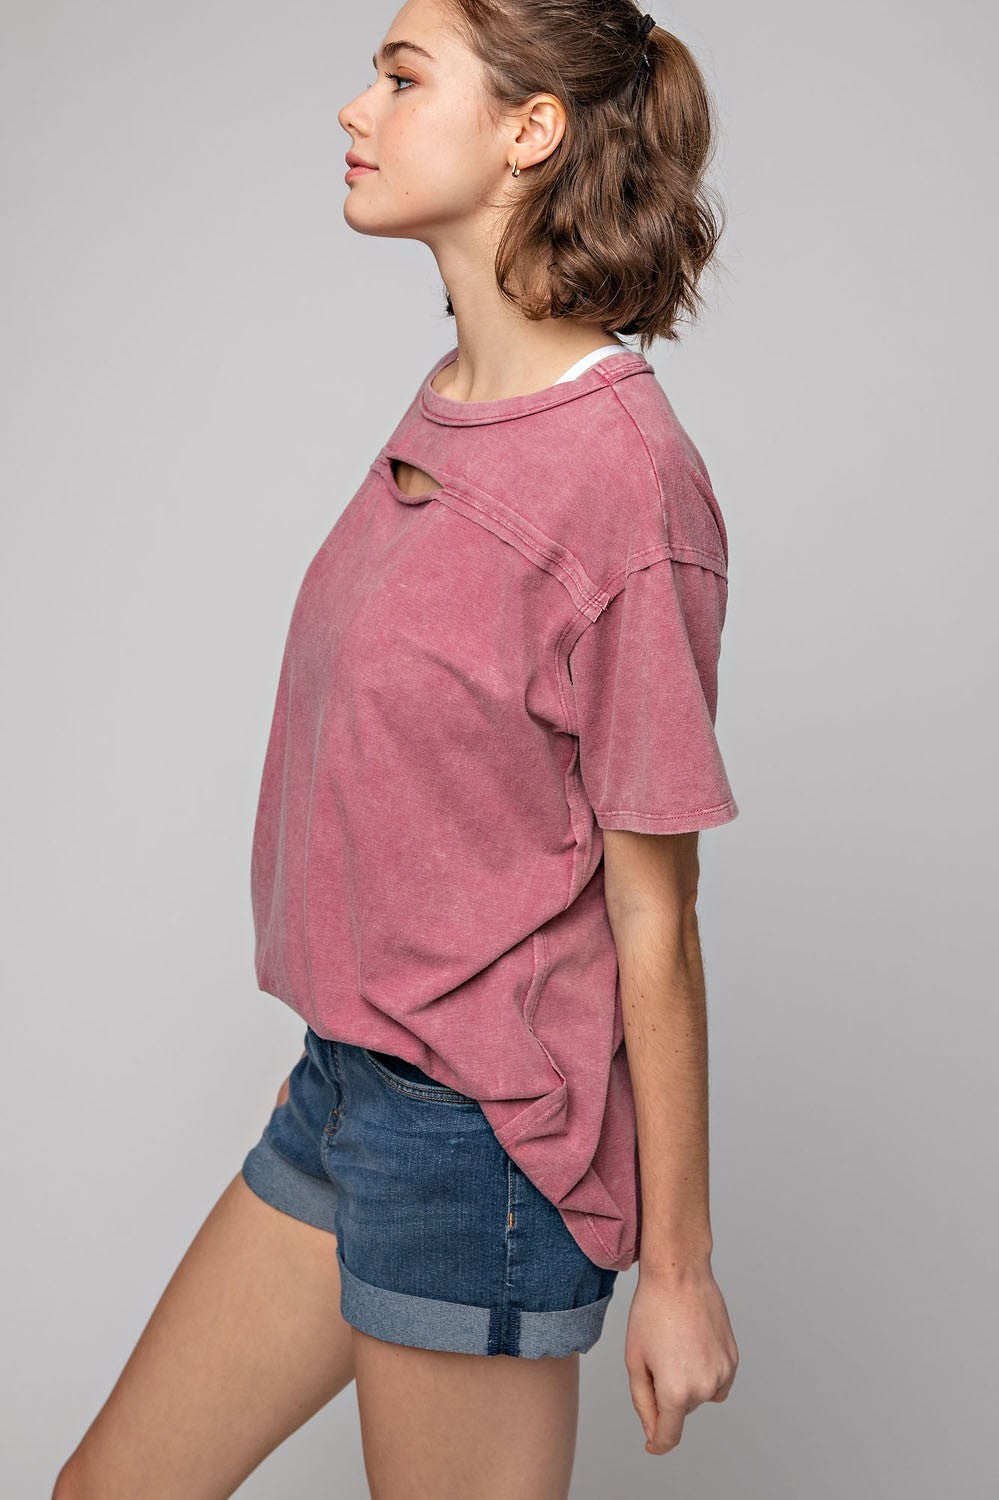 Mineral Wash Cutout Tee in Heathered Rose